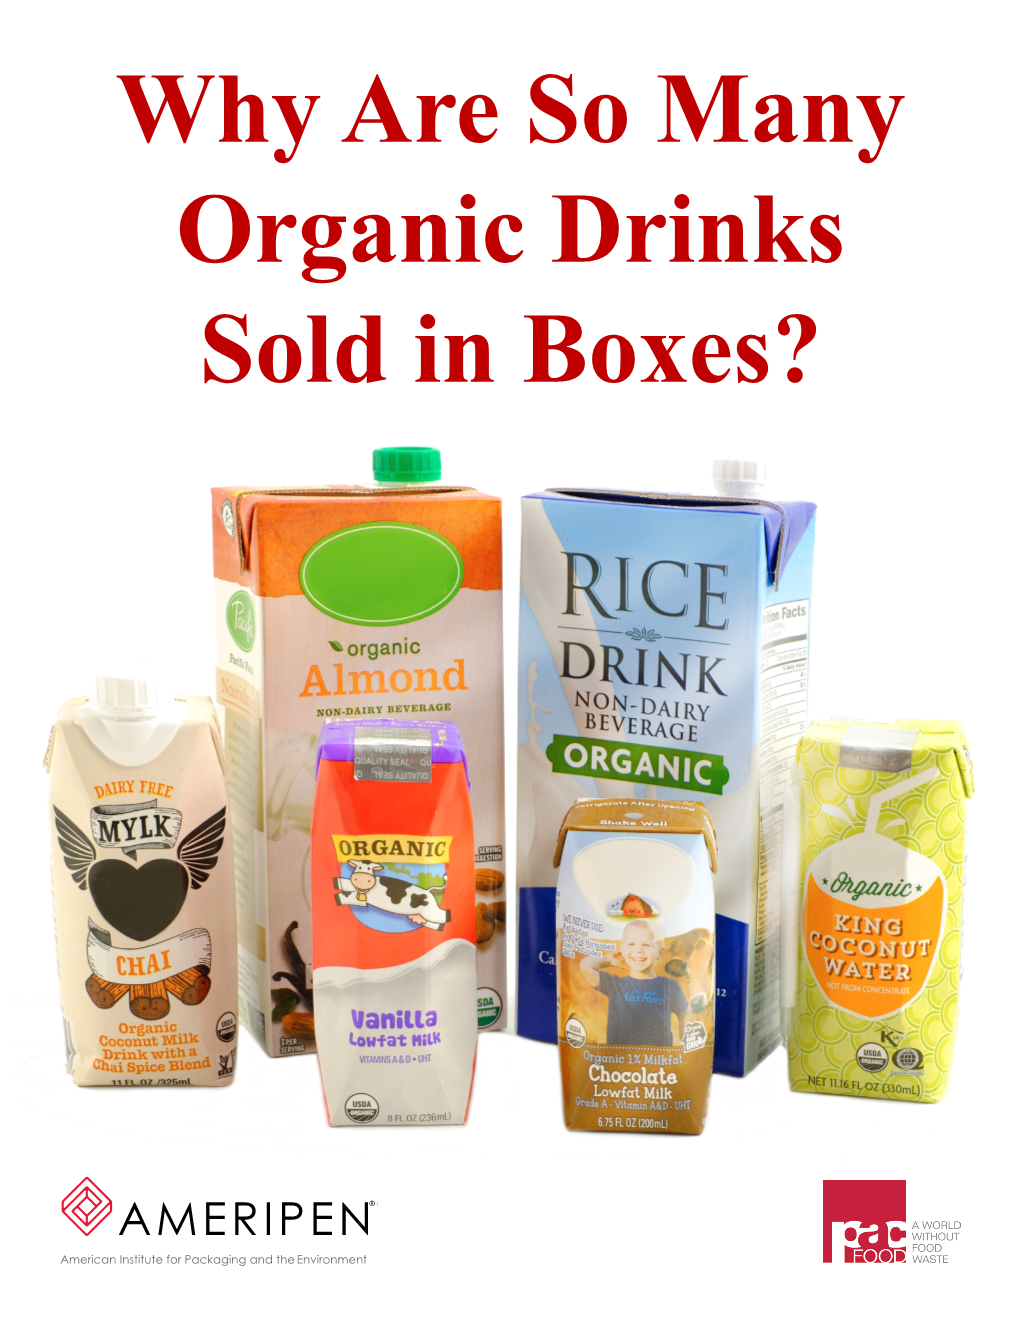 Why Are So Many Organic Drinks Sold in Boxes?